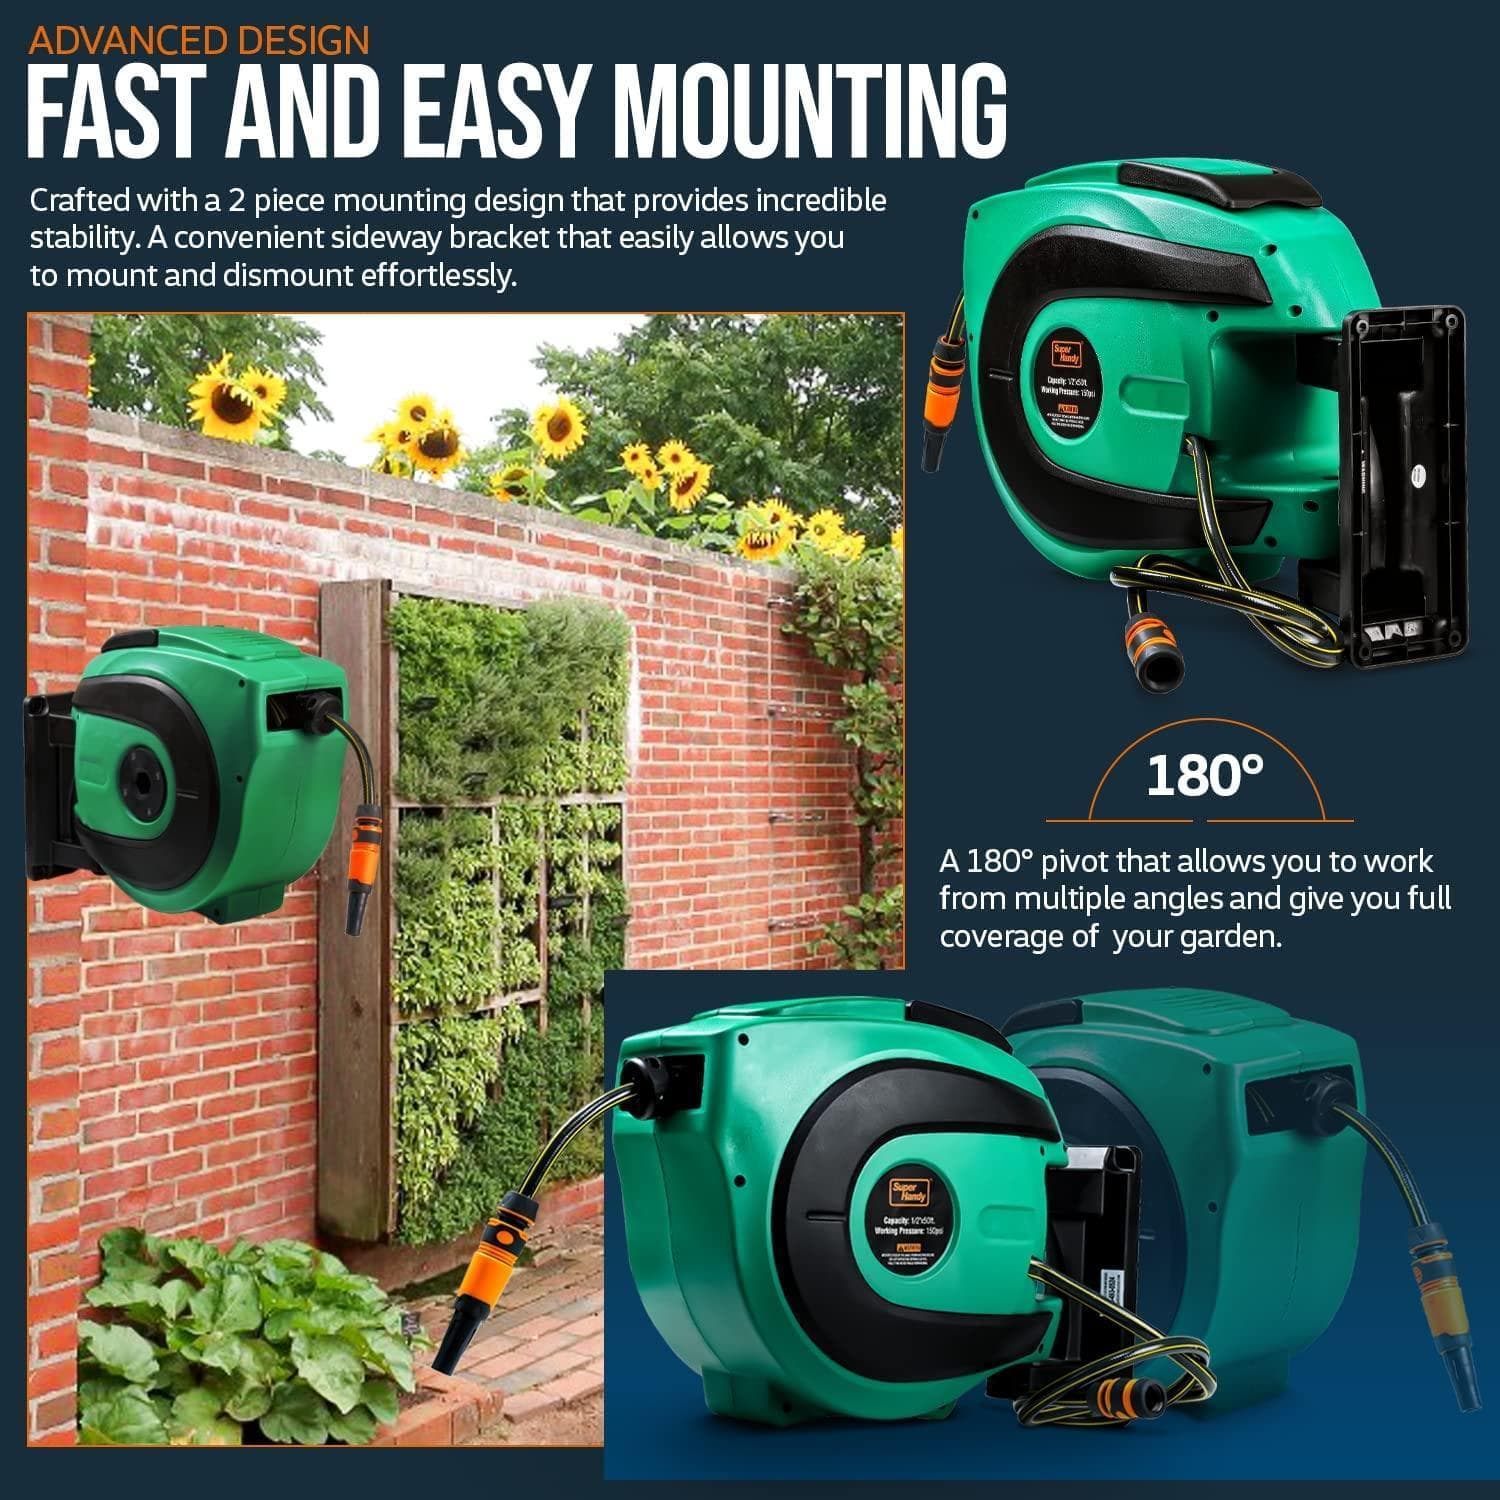 SuperHandy Mountable Retractable Water Hose Reel - 1/2 x 50' ft, 3/4 Female Threaded Connection